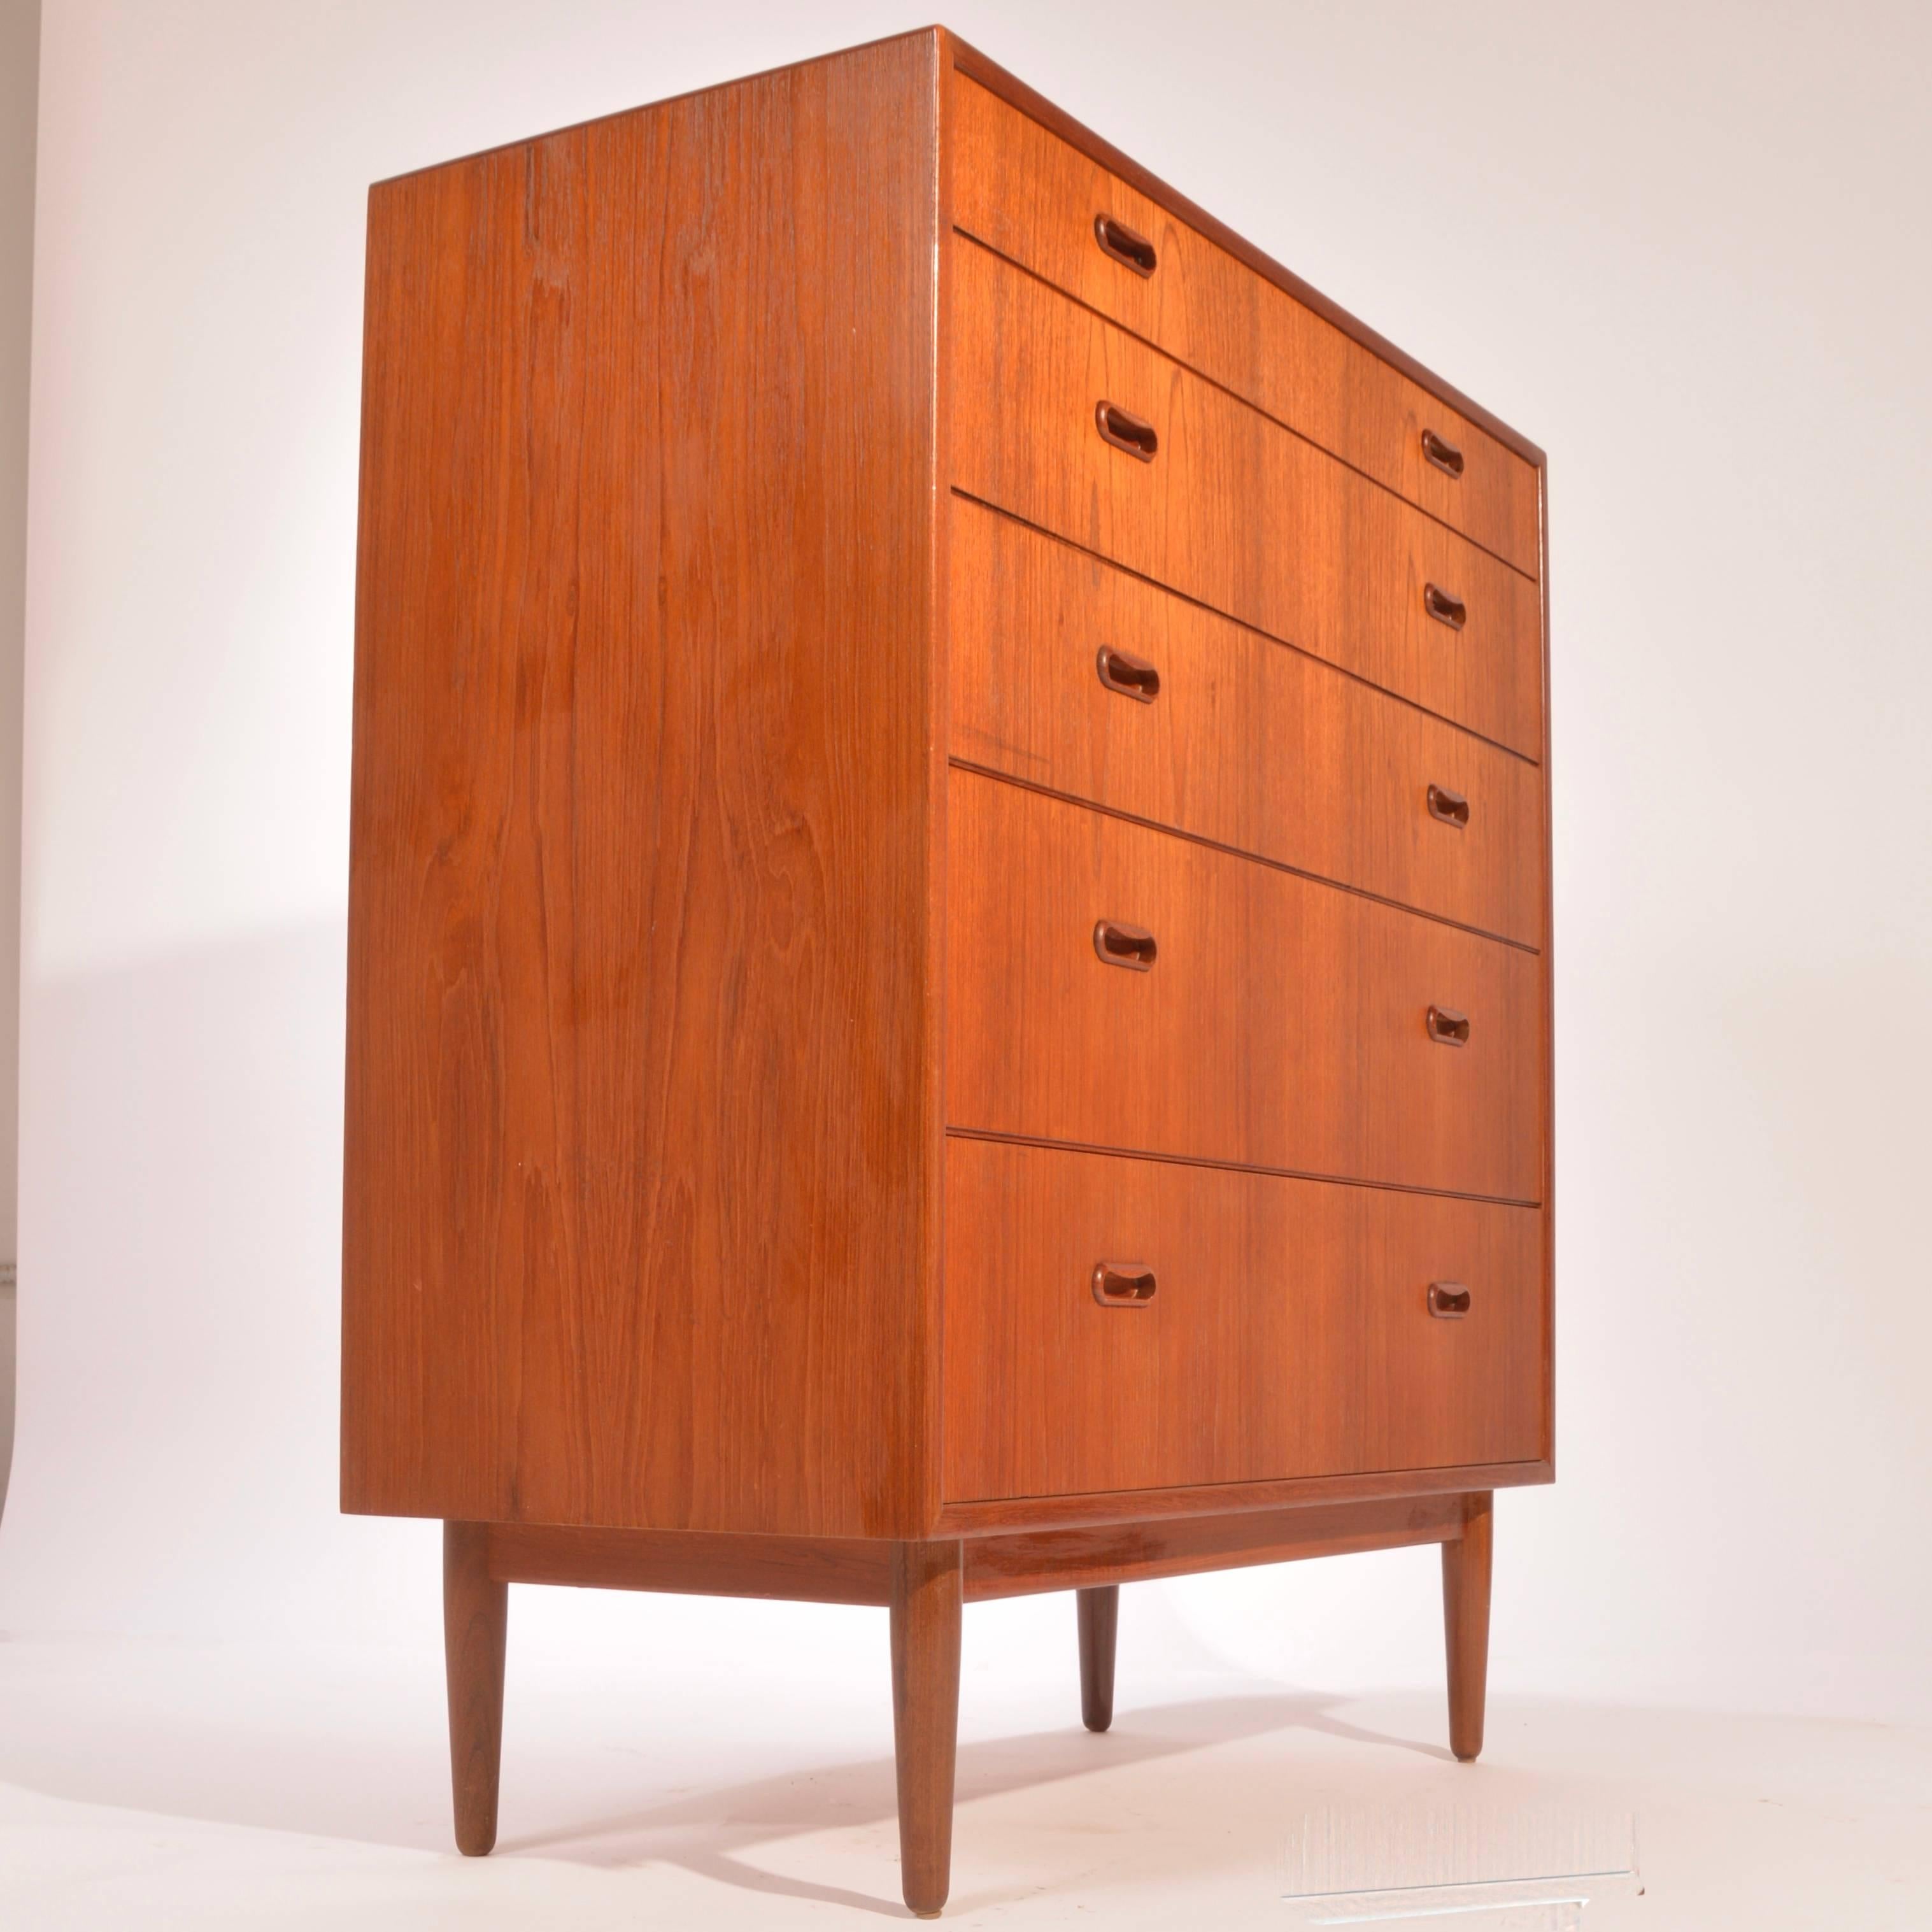 Well-designed tallboy teak dresser by Falster Mobelfabrik. Made from beautifully selected and matched teak veneer over hardwood ply construction and solid maple drawer boxes. We have the matching nine-drawer triple teak dresser available in a